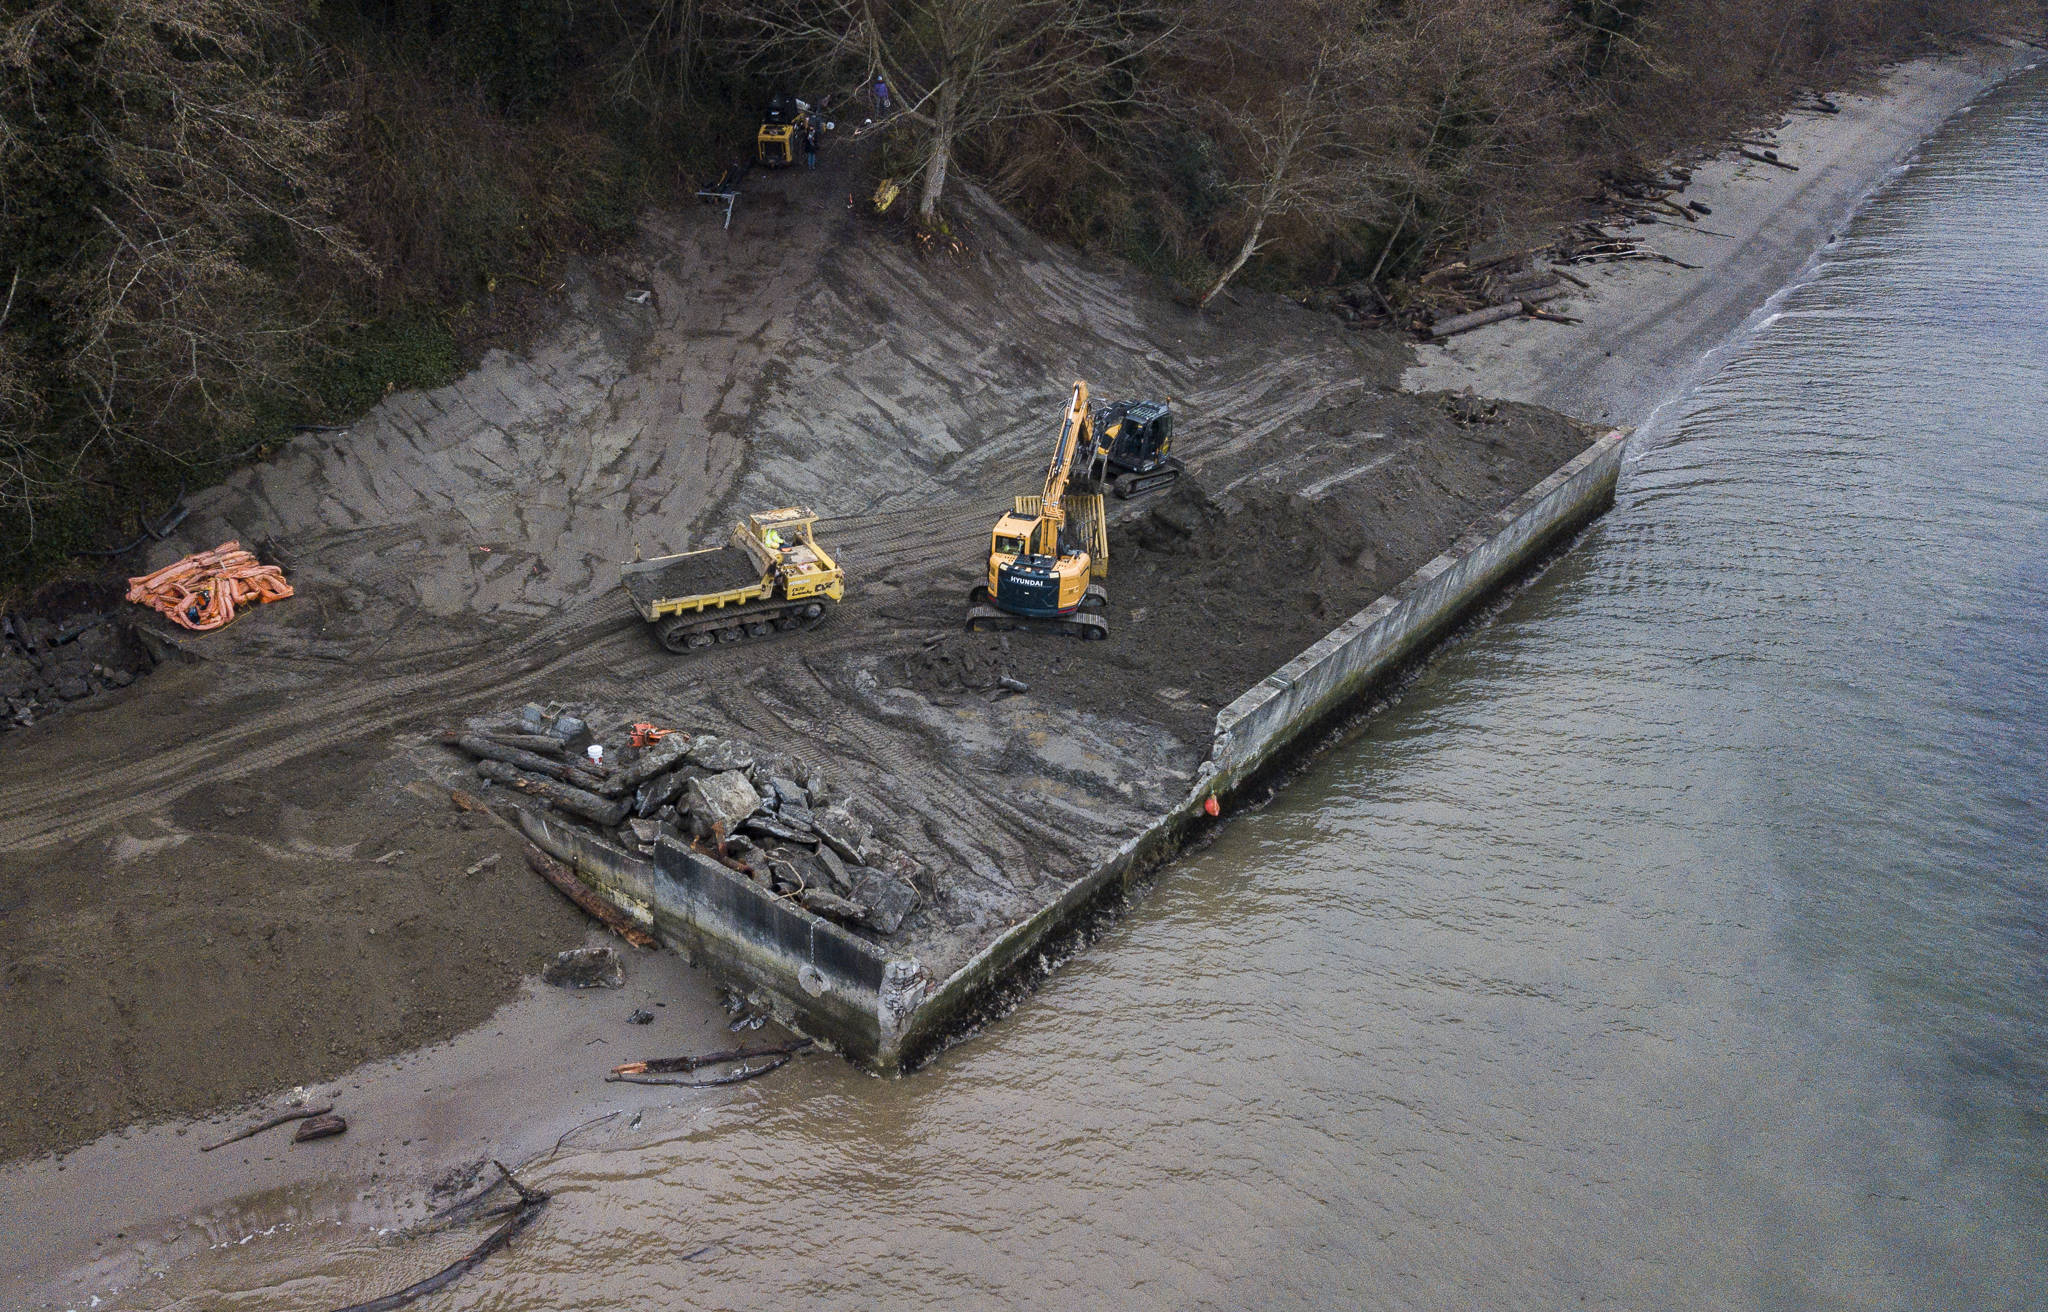 Shoreline restoration north of Langley on Whidbey Island involves removal of an old barge and bulkheads. Such habitat improvements are important to endangered salmon and their prey as sea level rises. This project is a partnership between Seahorse Siesta property owners and the Northwest Straits Foundation. (Olivia Vanni / The Herald)